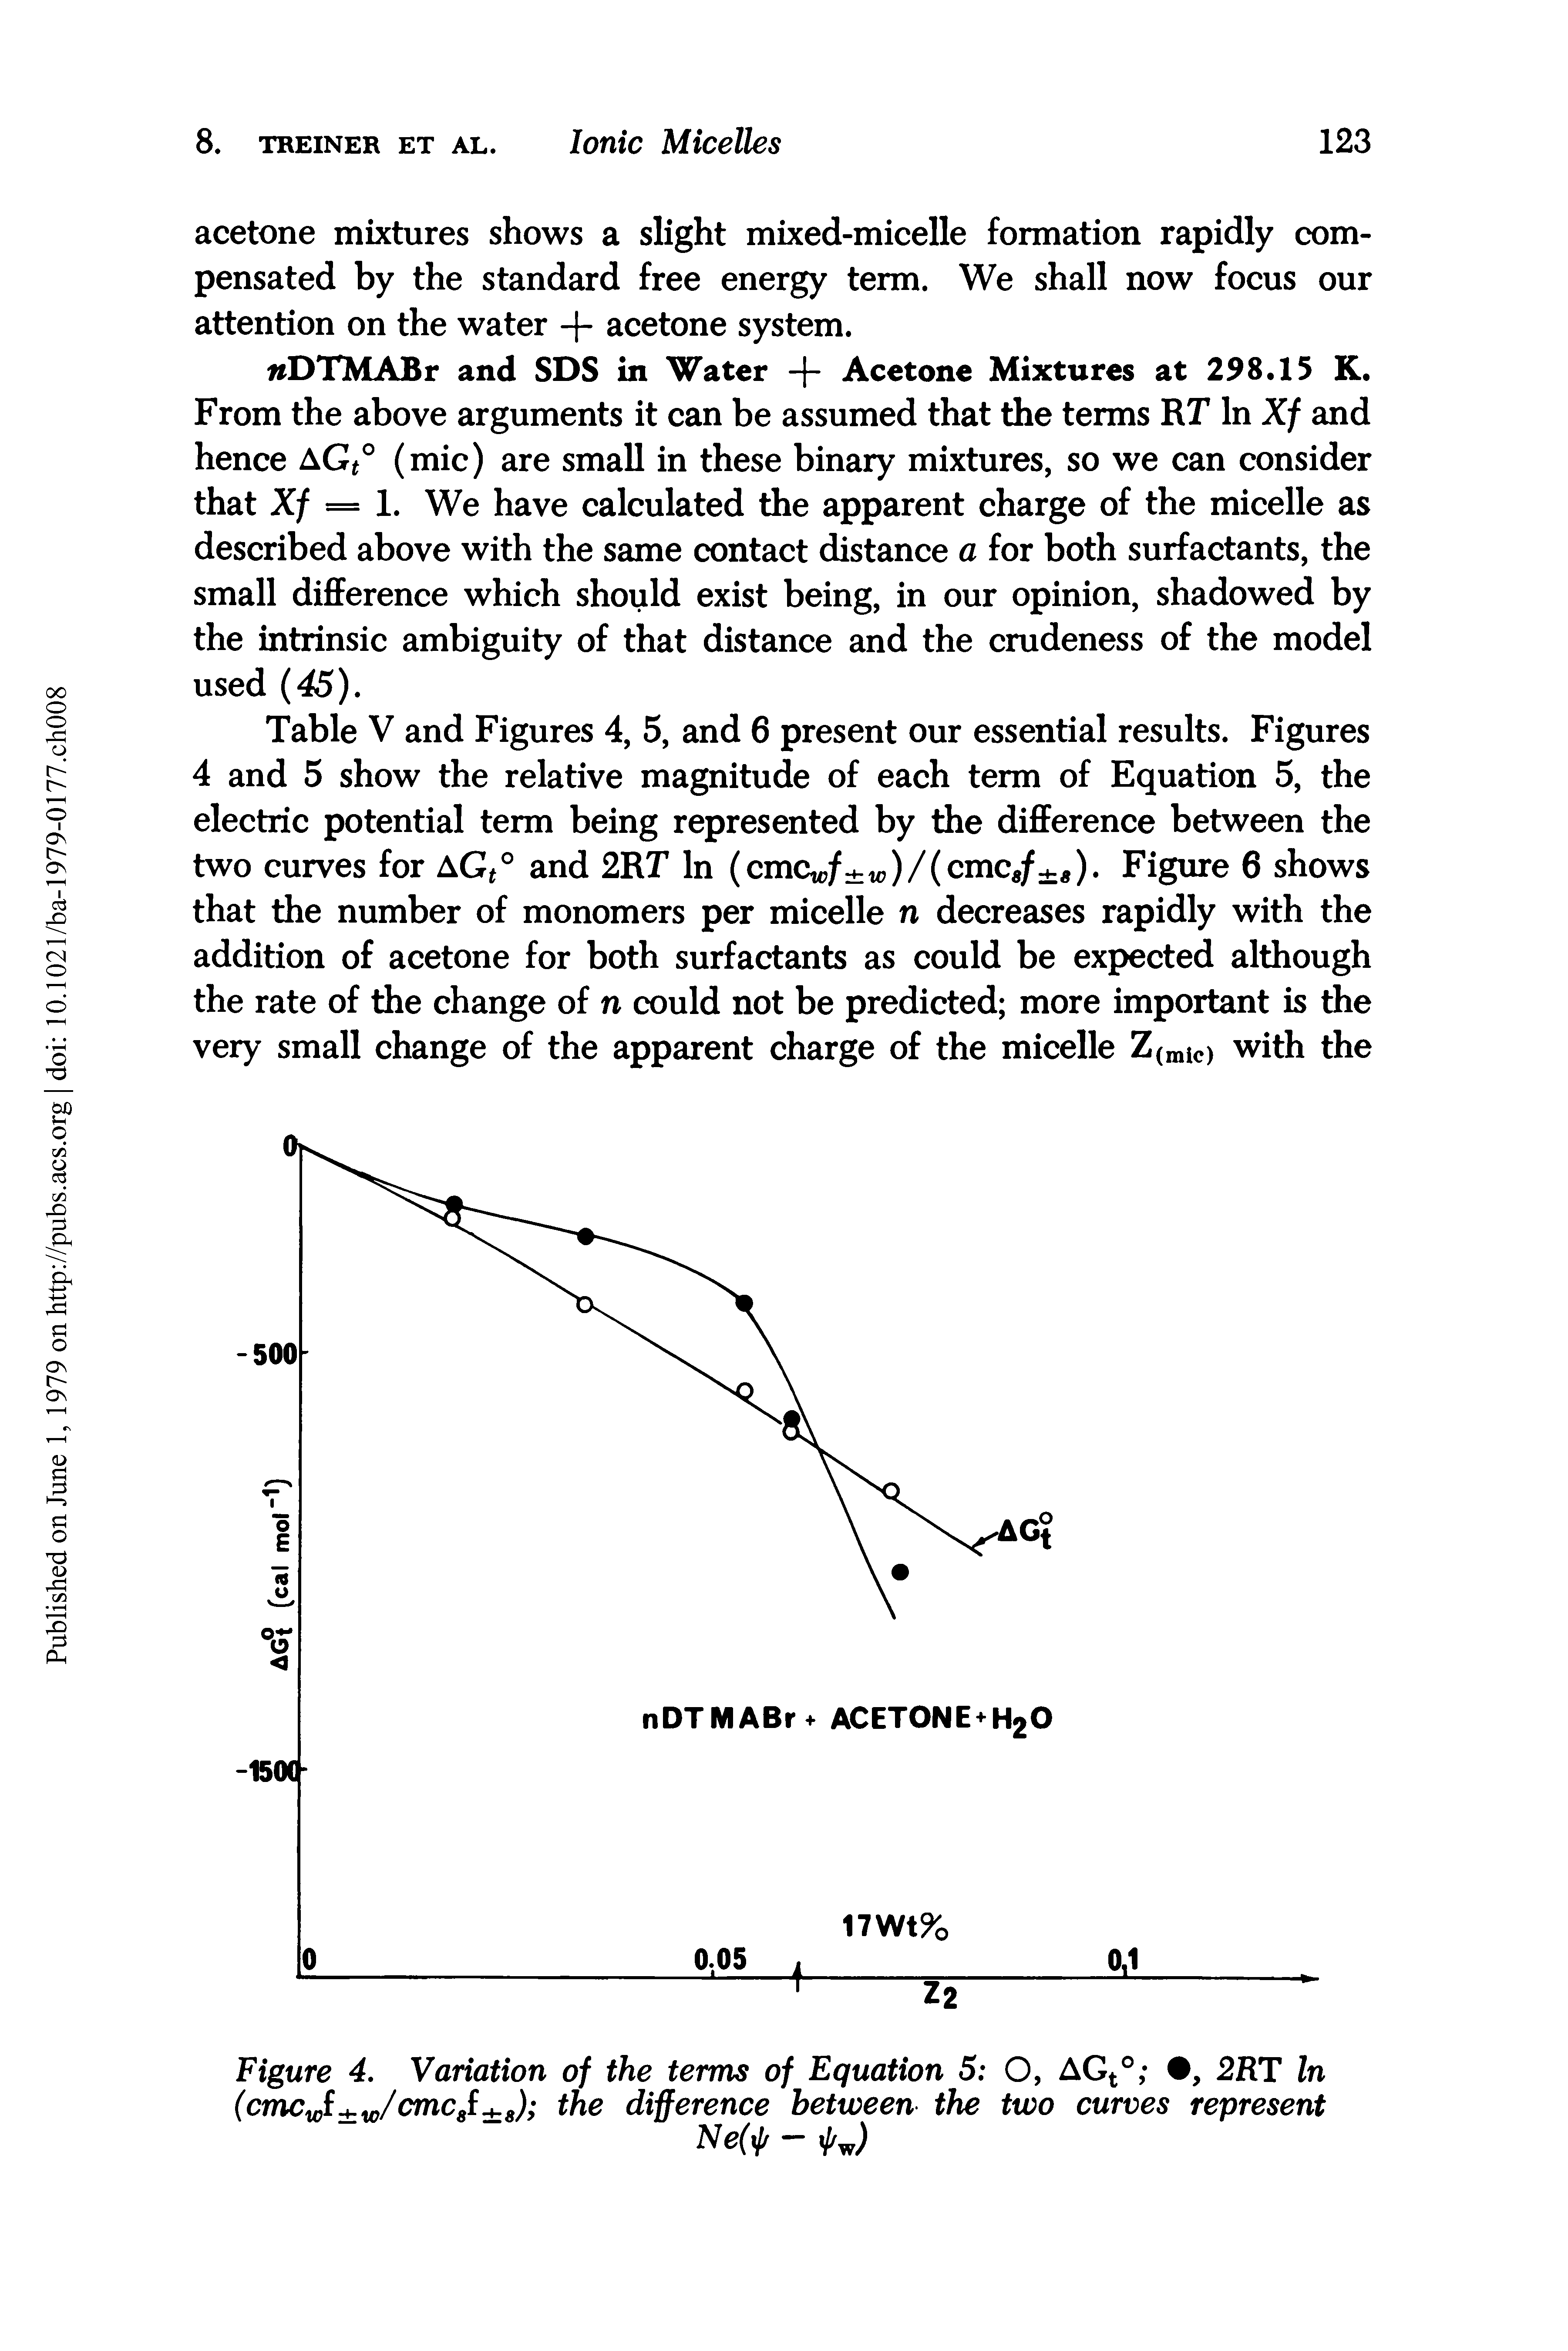 Table V and Figures 4, 5, and 6 present our essential results. Figures 4 and 5 show the relative magnitude of each term of Equation 5, the electric potential term being represented by the difference between the two curves for AGt° and 2RT In (cmcwf w)/(cmc8f 8). Figure 6 shows that the number of monomers per micelle n decreases rapidly with the addition of acetone for both surfactants as could be expected although the rate of the change of n could not be predicted more important is the very small change of the apparent charge of the micelle Z(mic) with the...